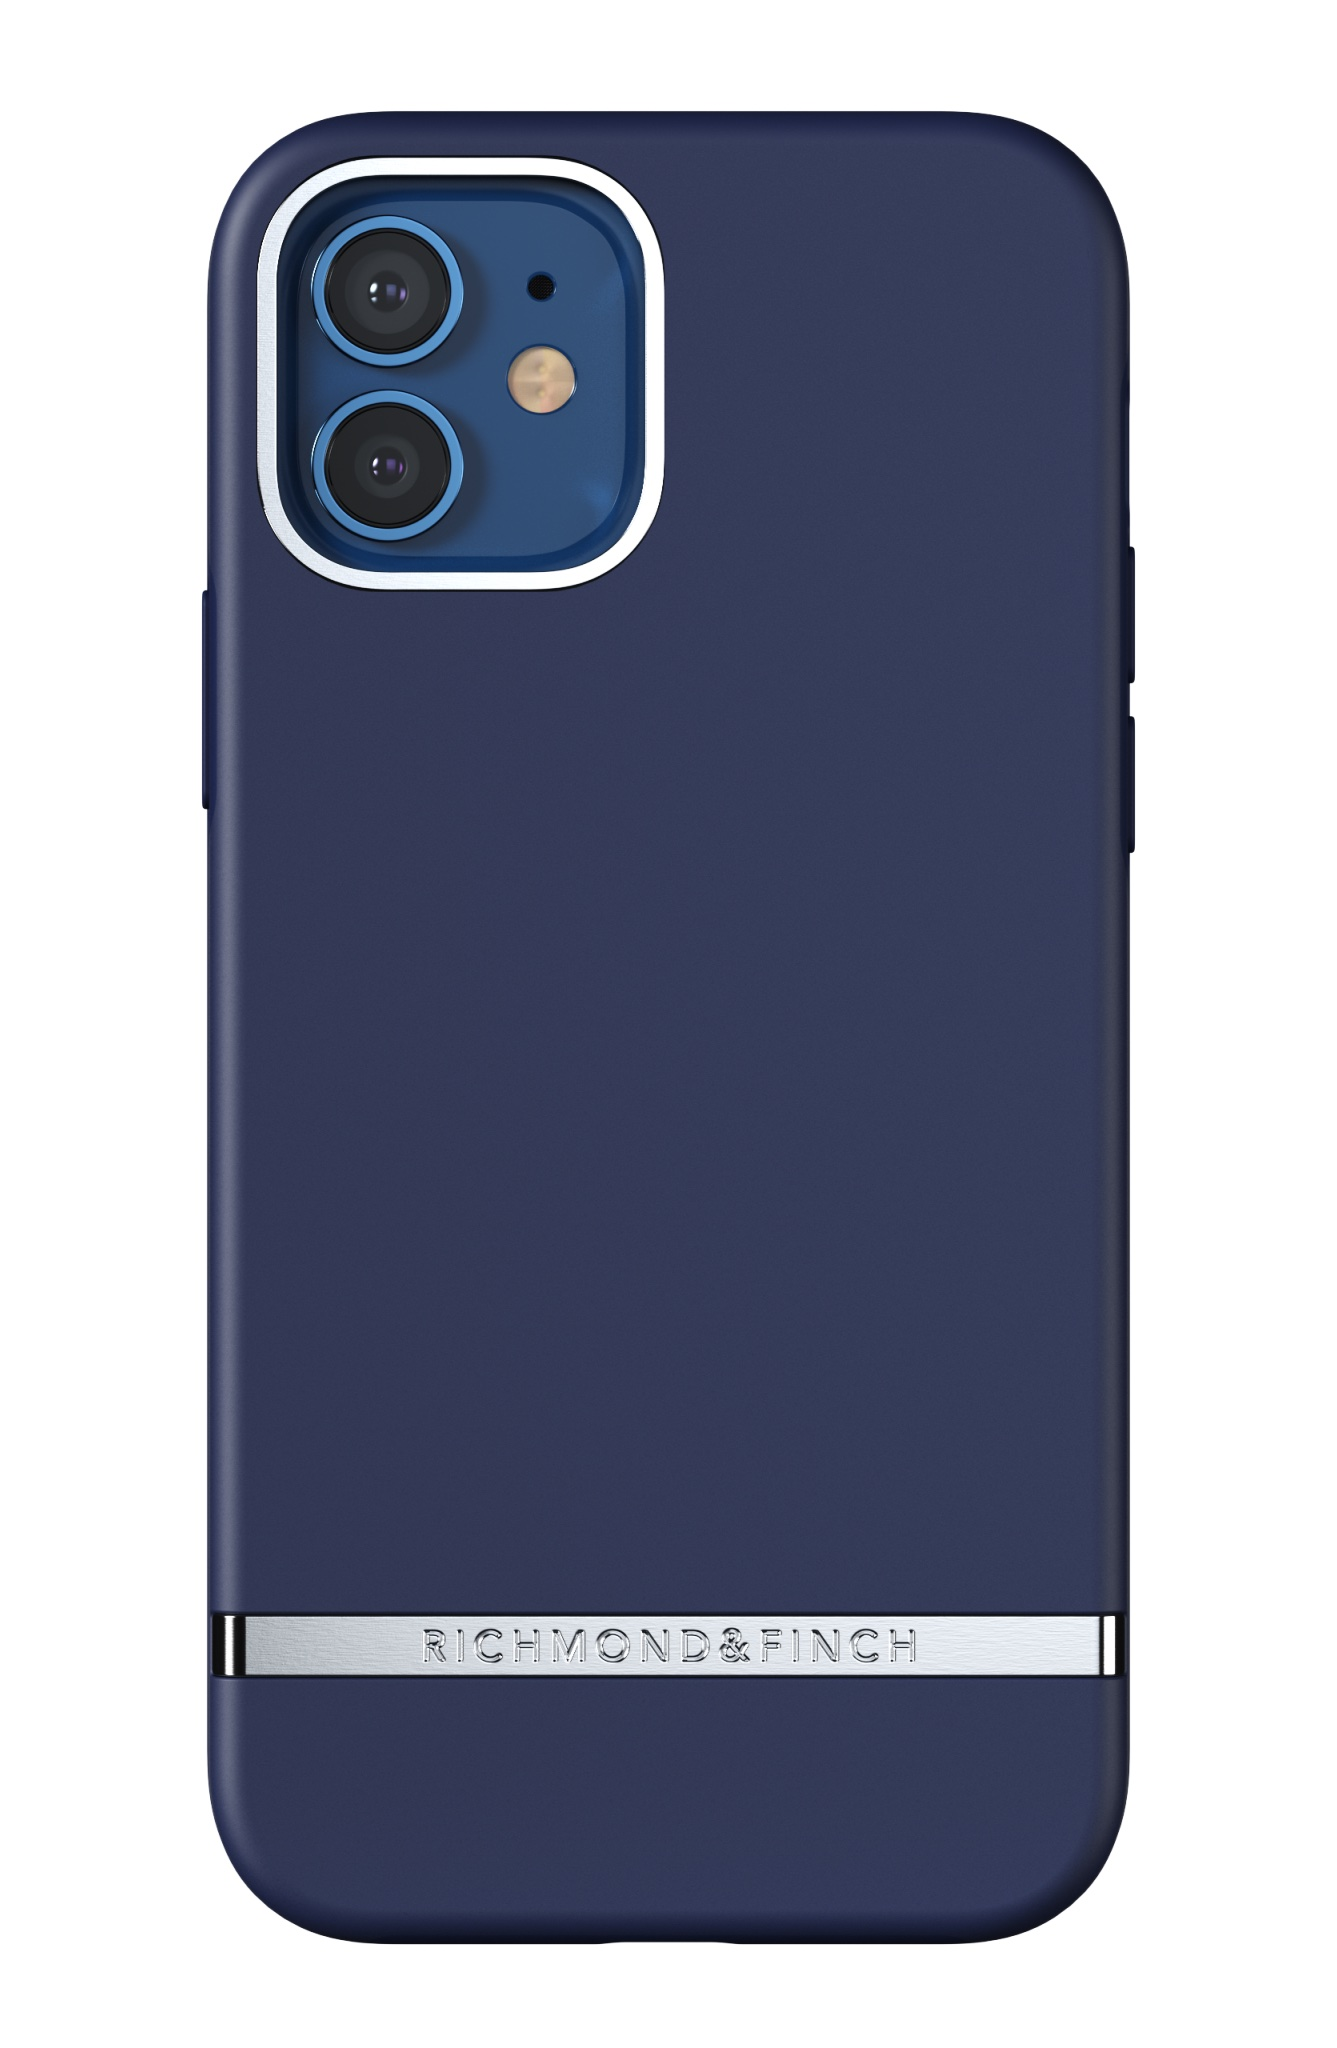 12 12 PRO, & 12 IPHONE Navy iPhone BLUE Backcover, FINCH RICHMOND & APPLE, Pro,